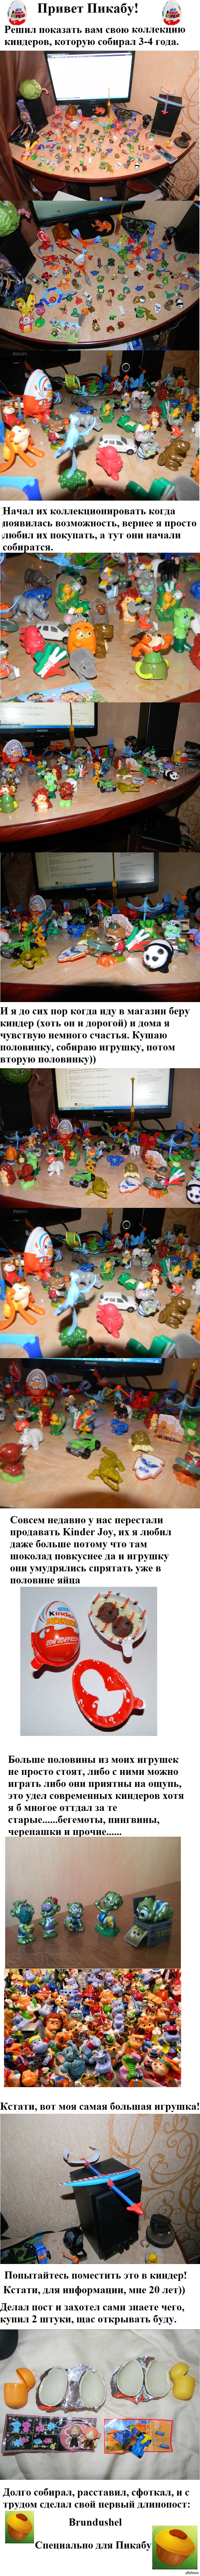 My kinder collection. - My, Kinder Surprise, Collection